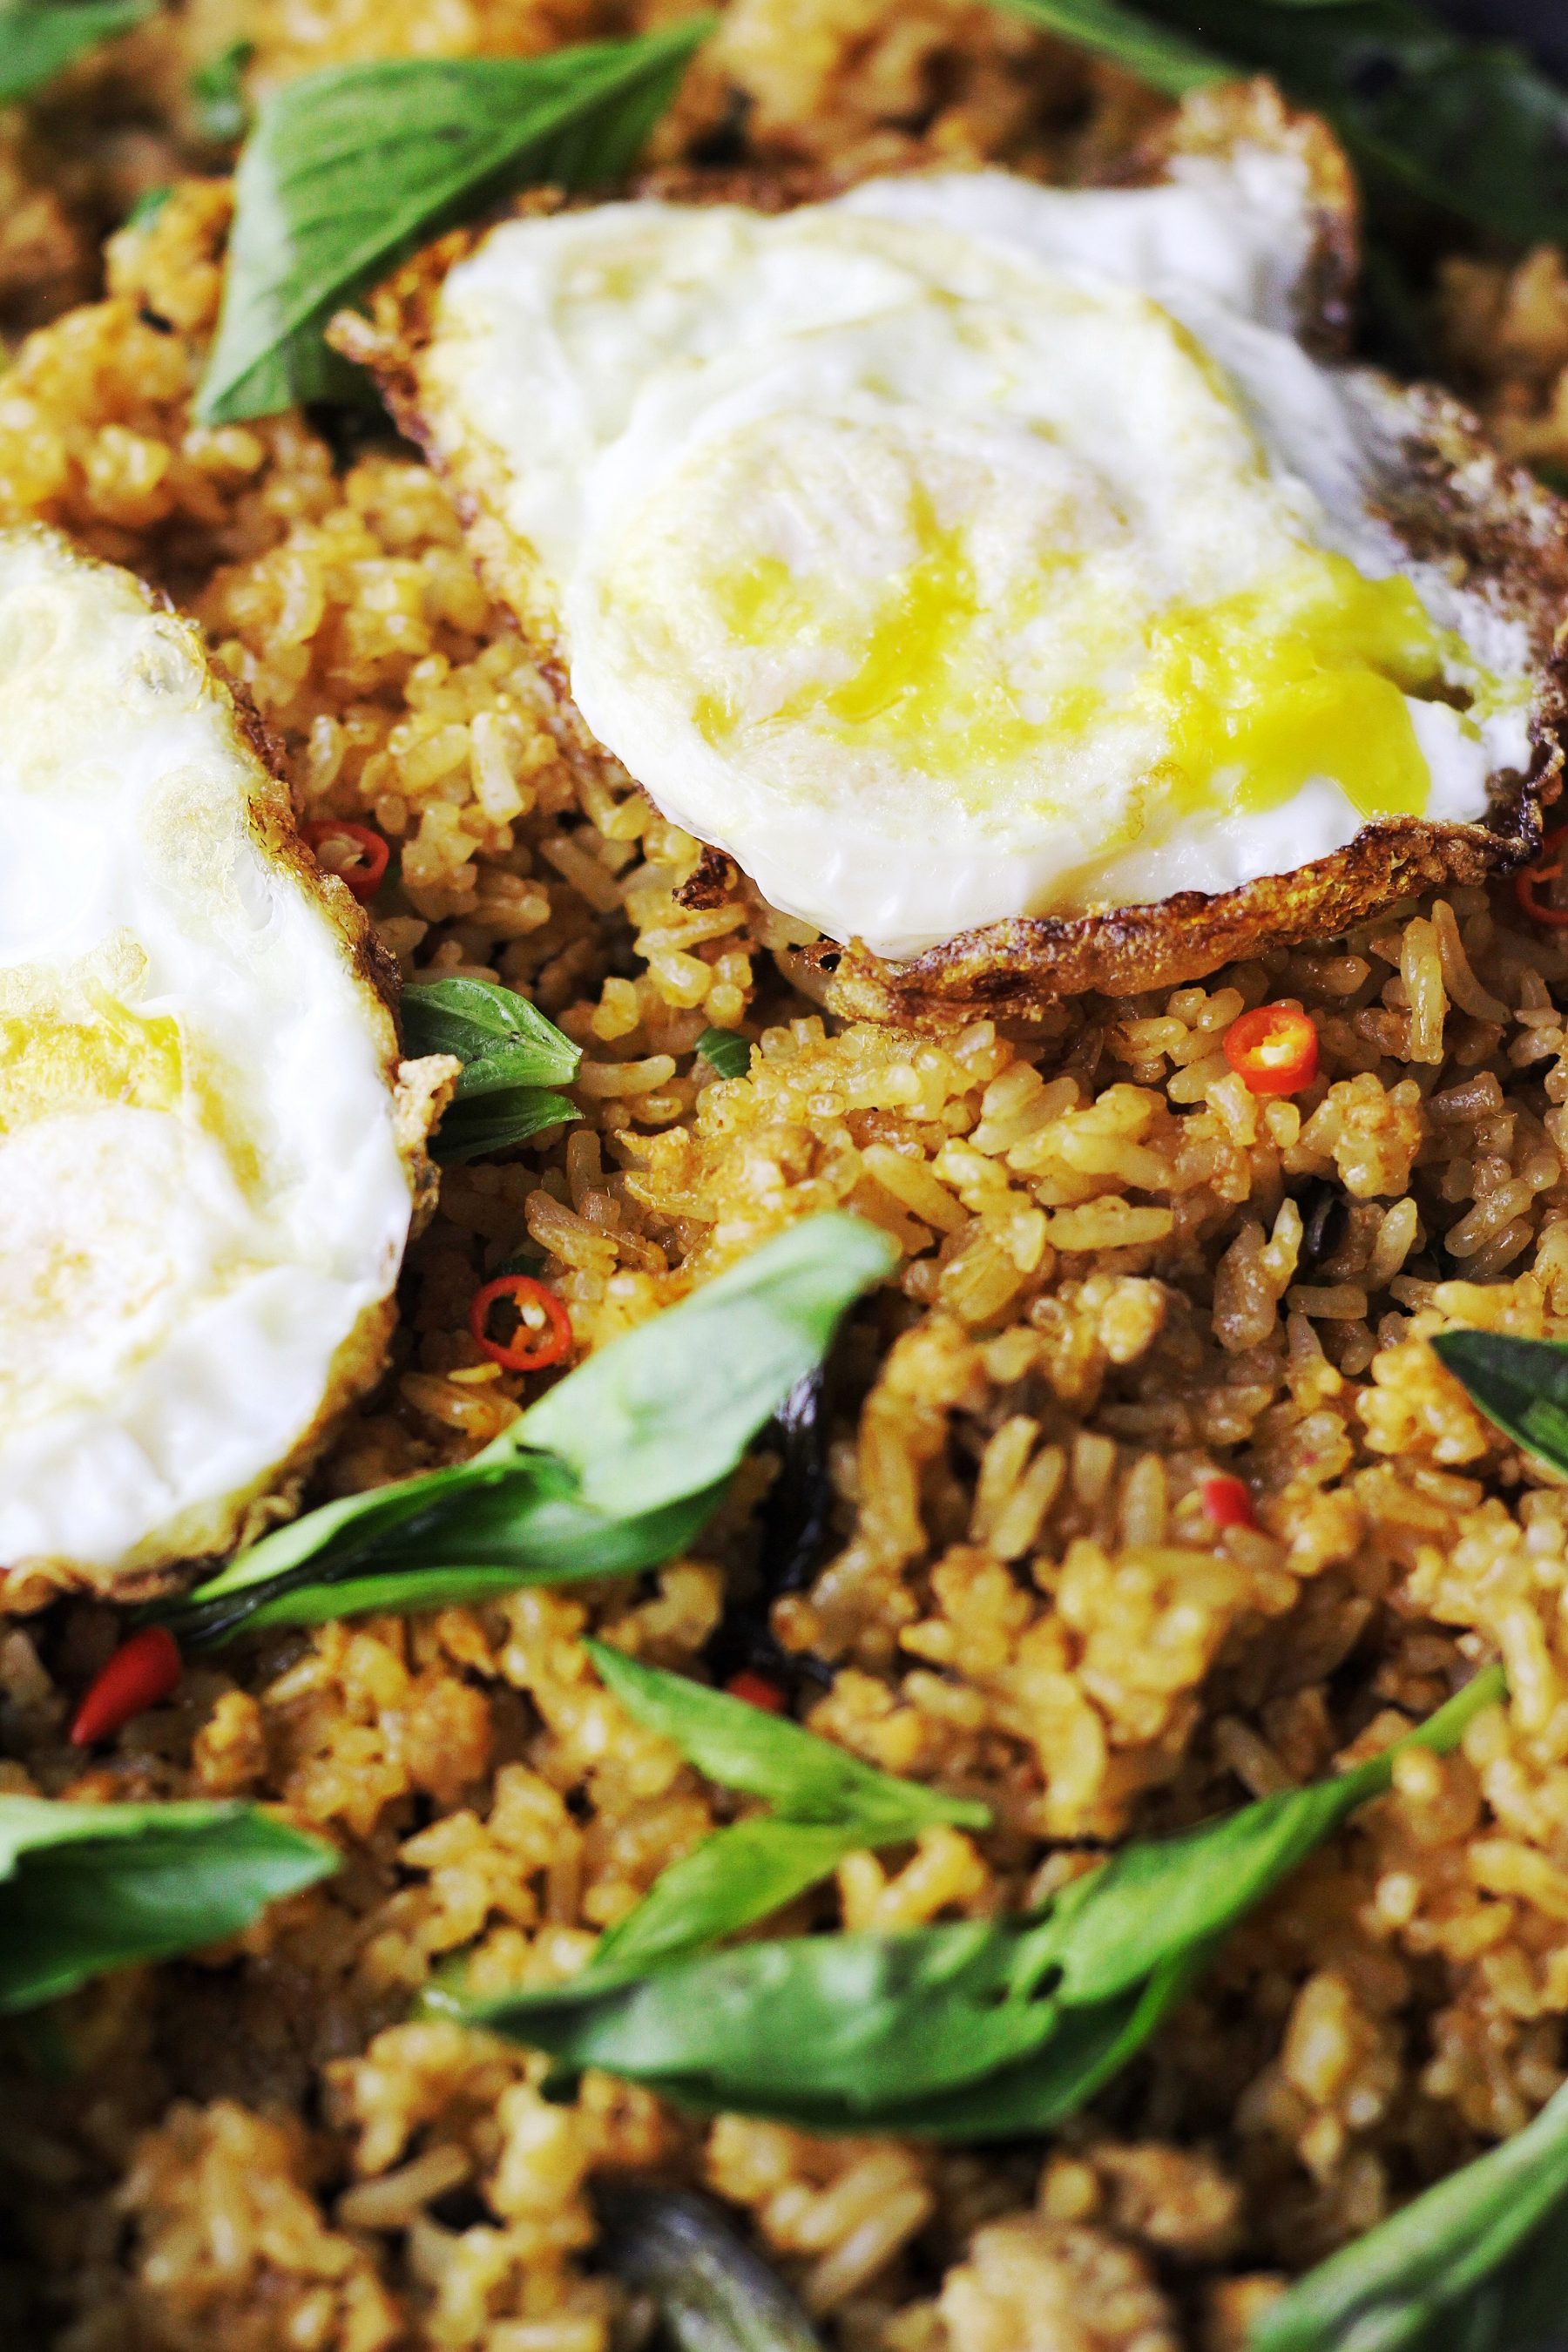 Another close up of Tom Yum pork Fried rice with fresh thai basil.